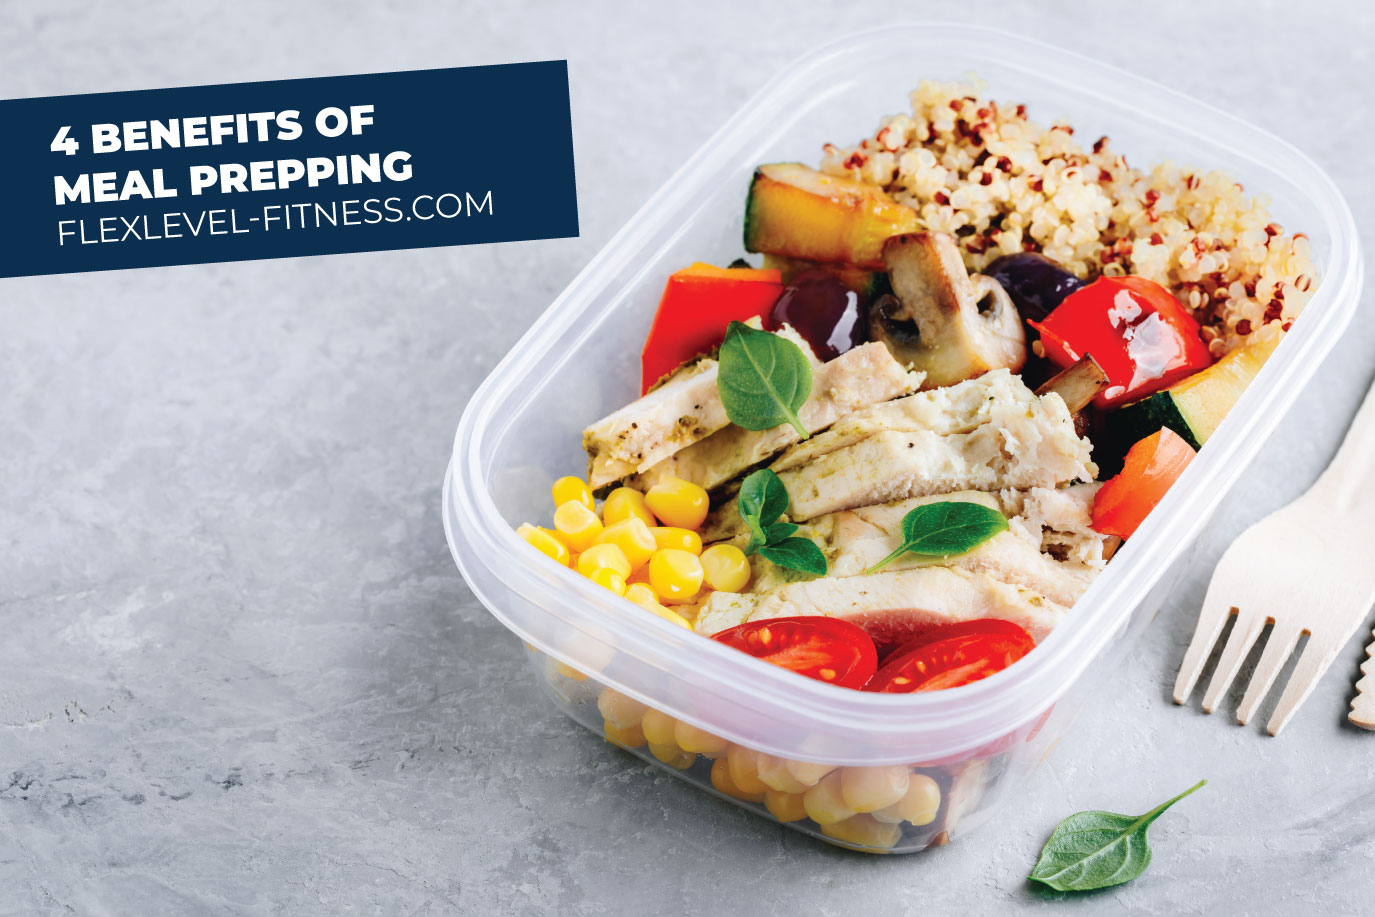 Top 4 Benefits of Meal Prepping